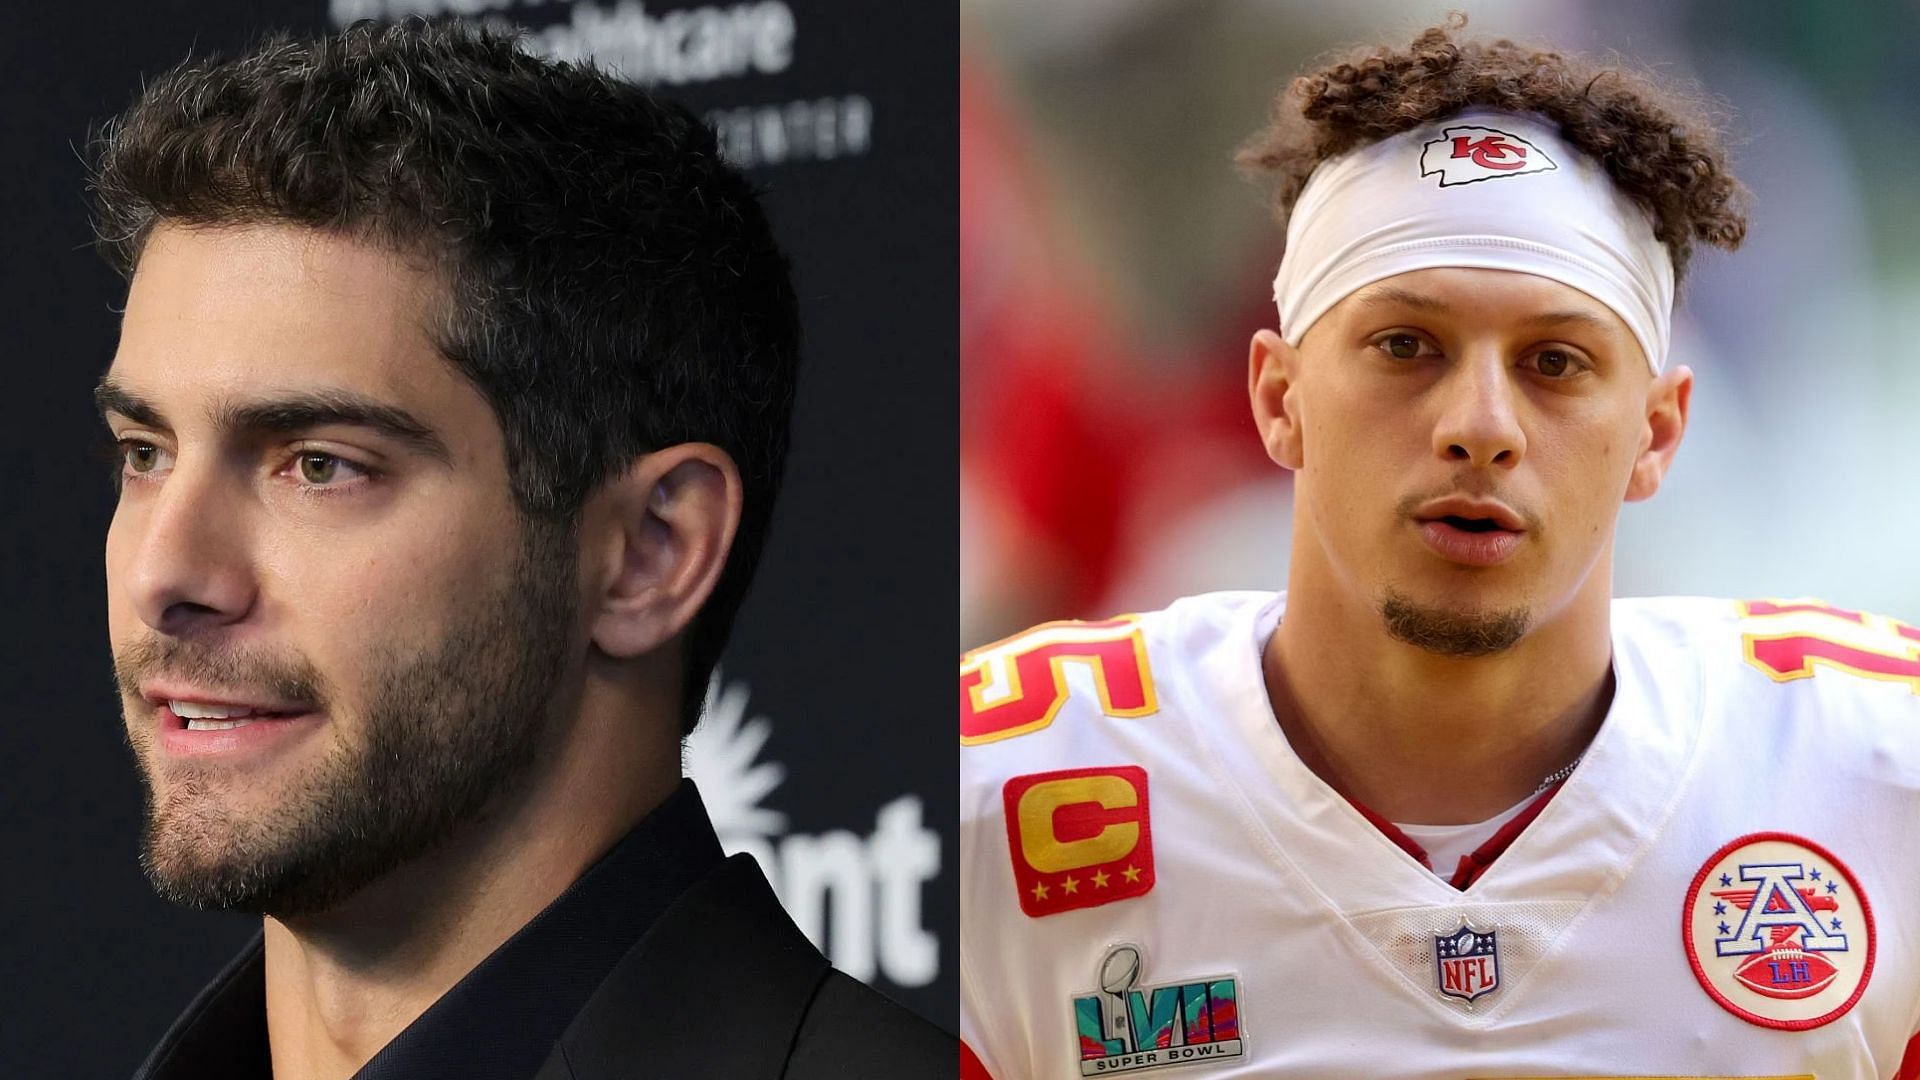 Jimmy Garoppolo&rsquo;s injury update leaves fans teasing Patrick Mahomes and the Kansas City Chiefs.